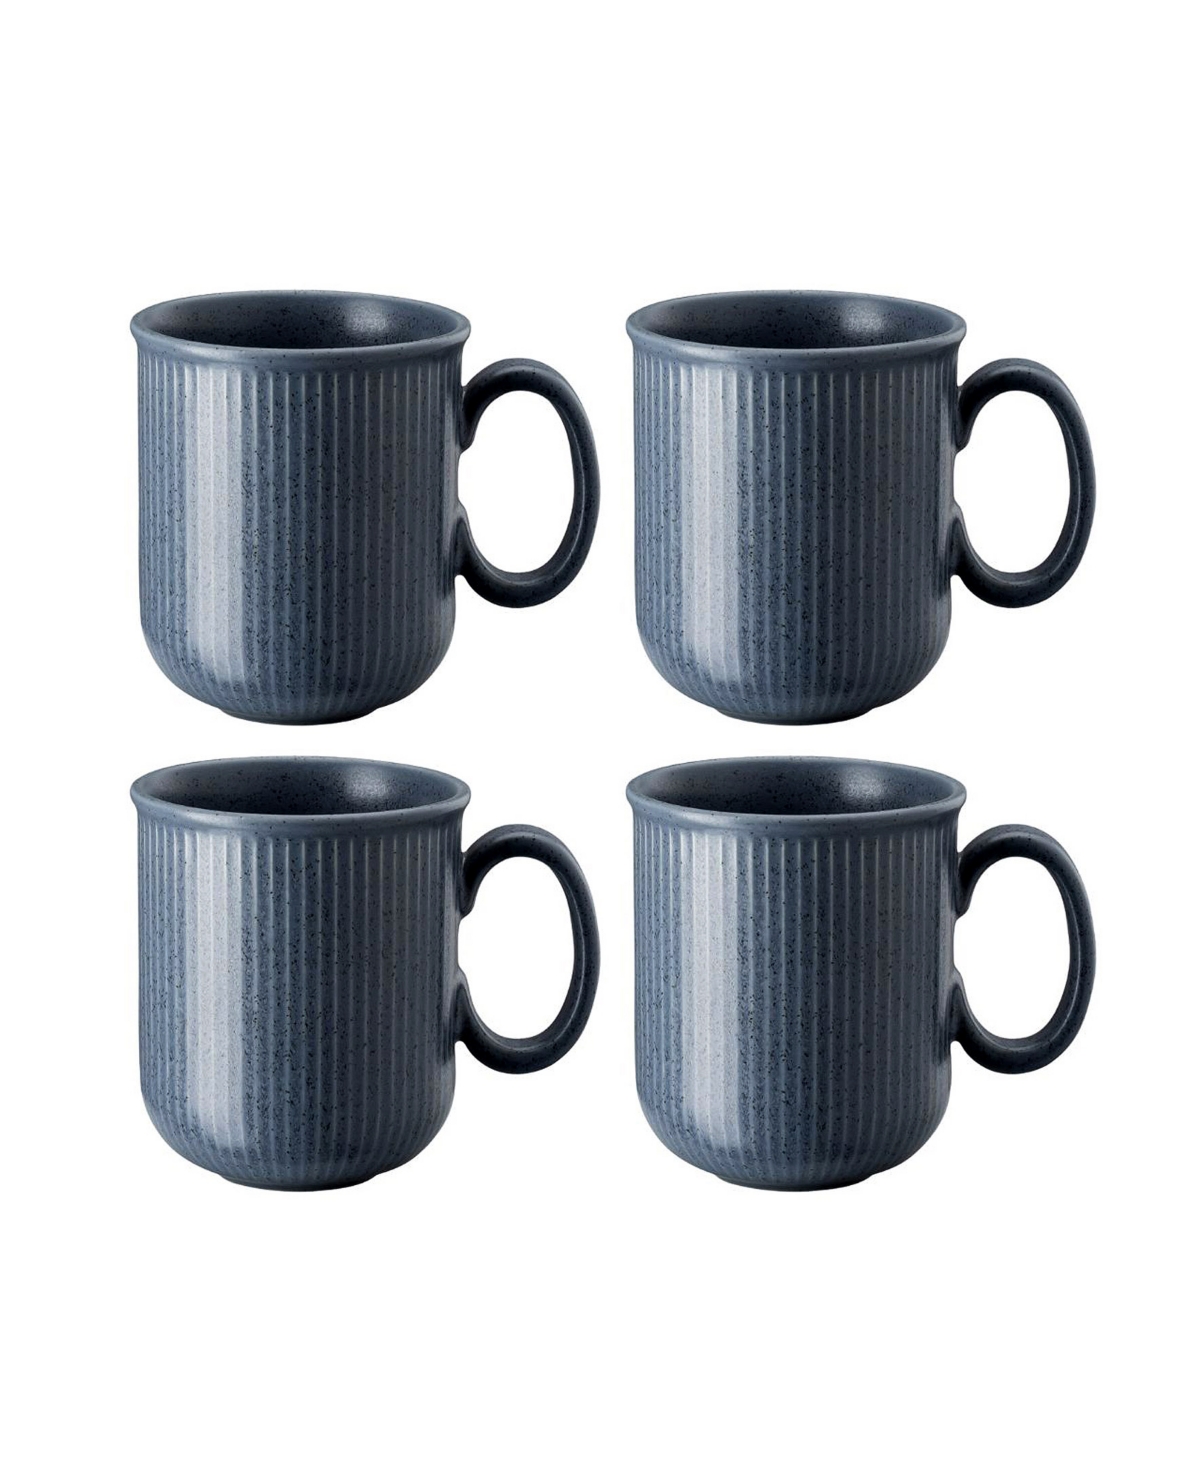 Clay Set of 4 Mugs, Service for 4 - Sky Blue